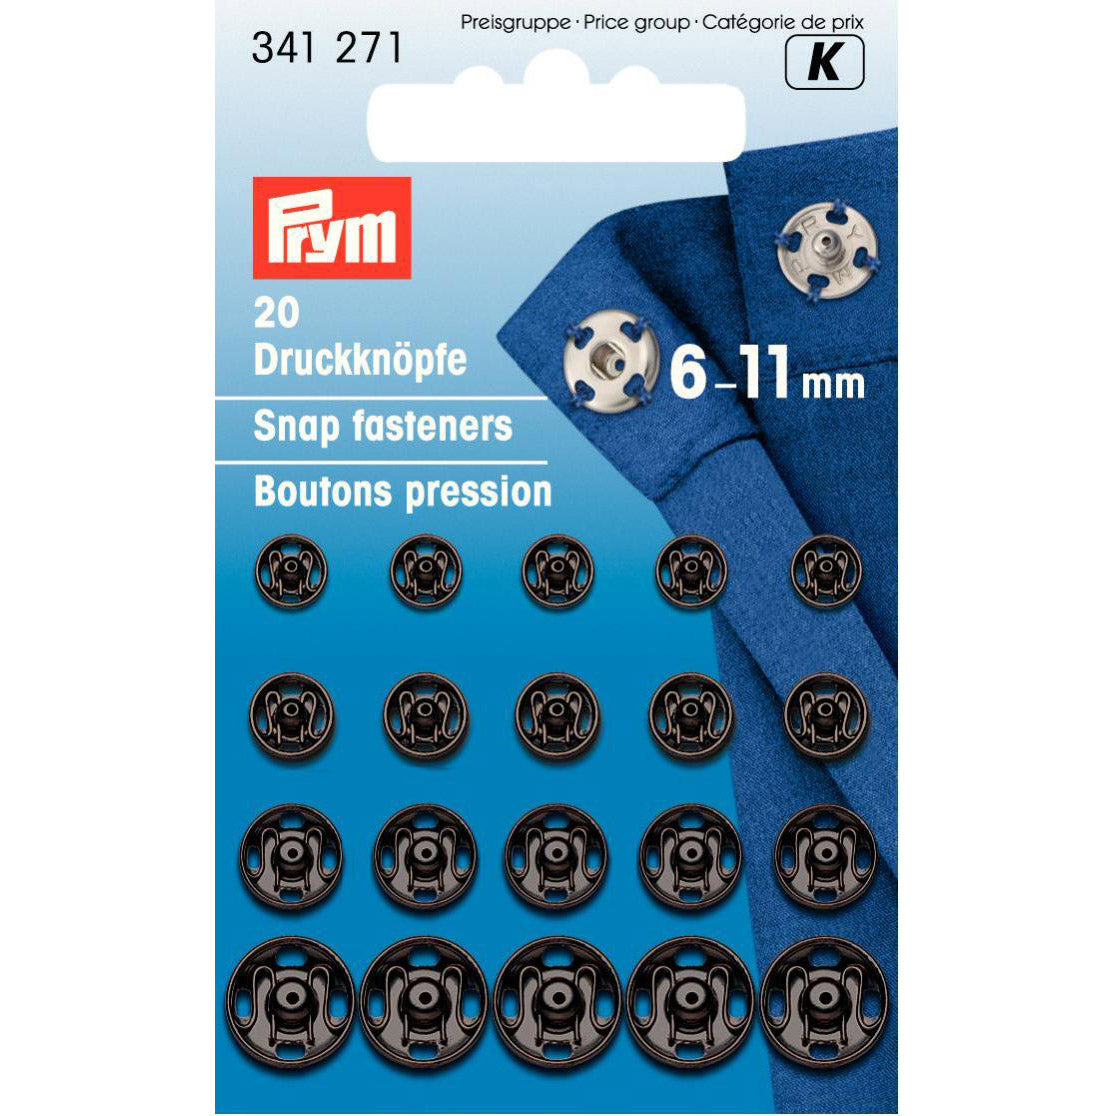 Sew-On Snap Fasteners Assorted 6-11mm Black Colour, Prym